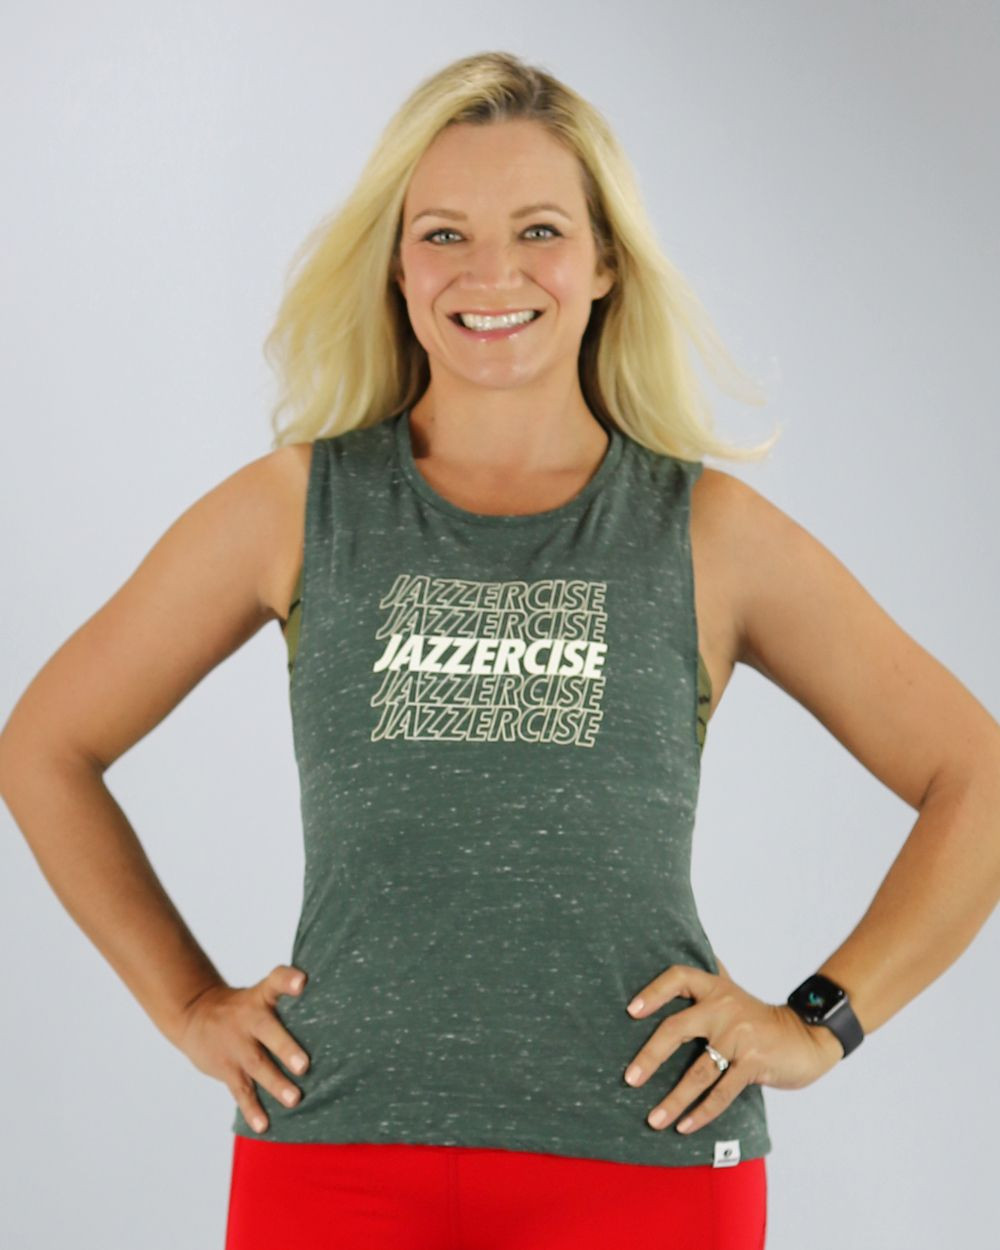 Jazzercise - We're down in the Jazzercise Apparel Holiday